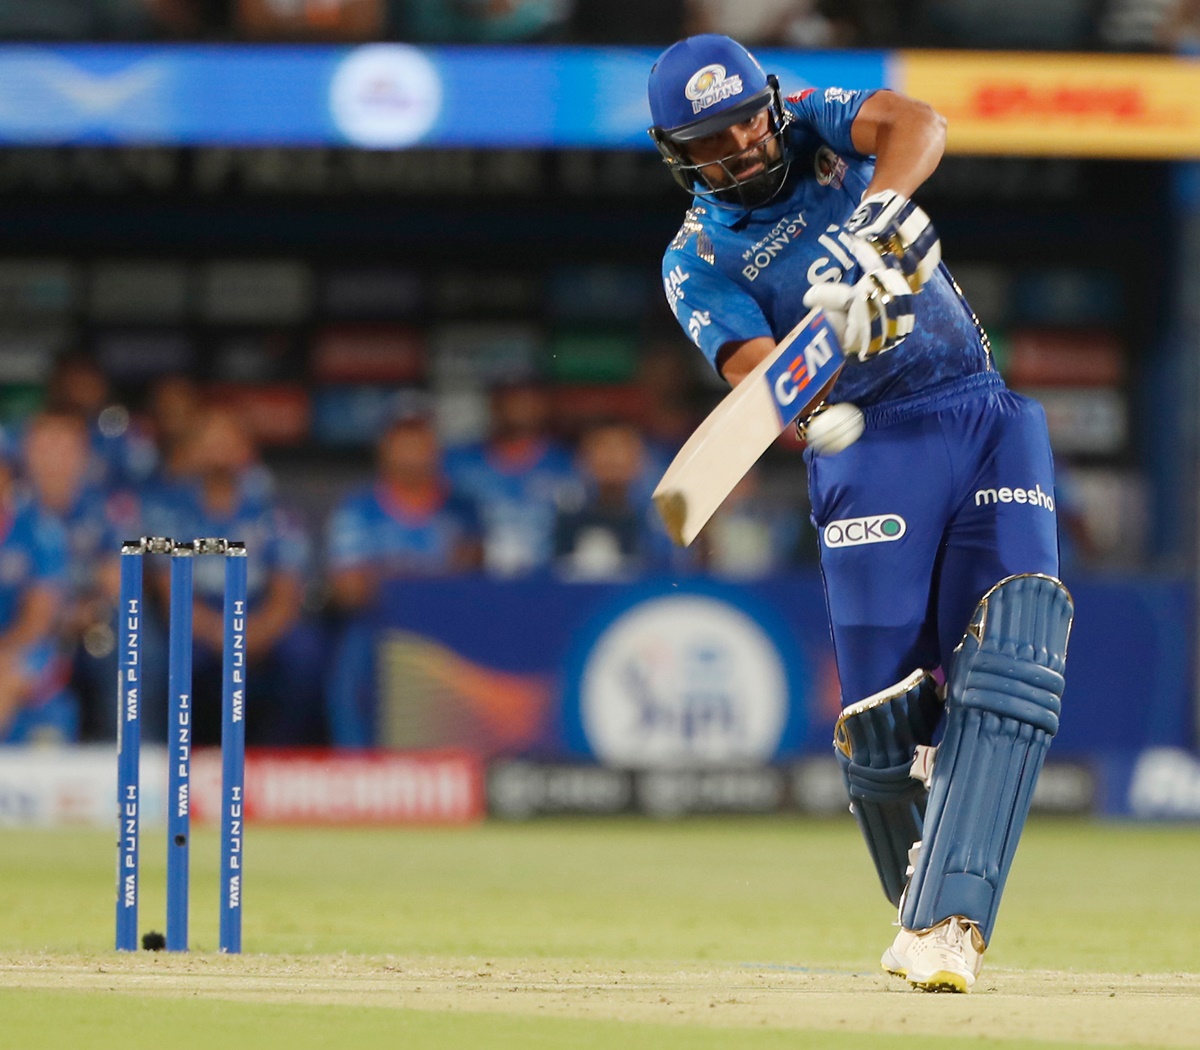 The Rohit Sharma-led Mumbai Indians are still searching for their first victory this season